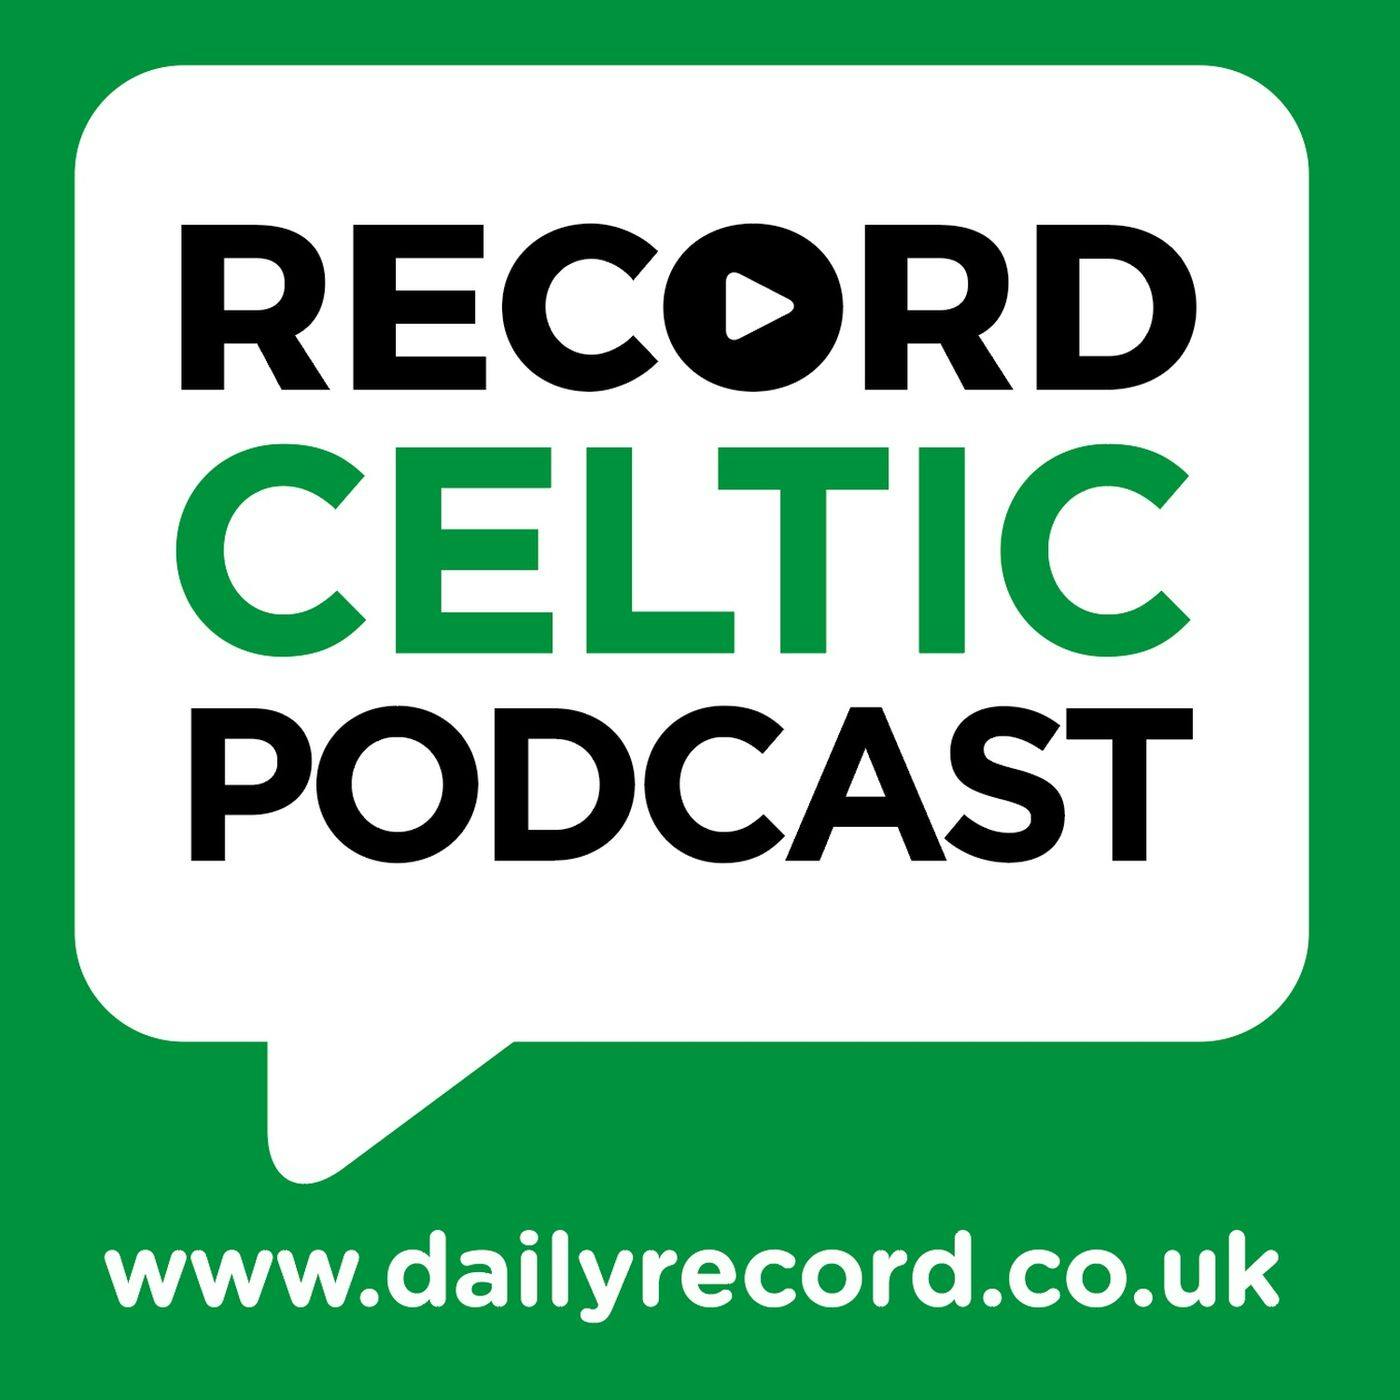 Eddie Howe’s lengthly to-do list | The biggest rebuild in Celtic history? | Scott Brown: One of the Glasgow Derby’s all-time greats